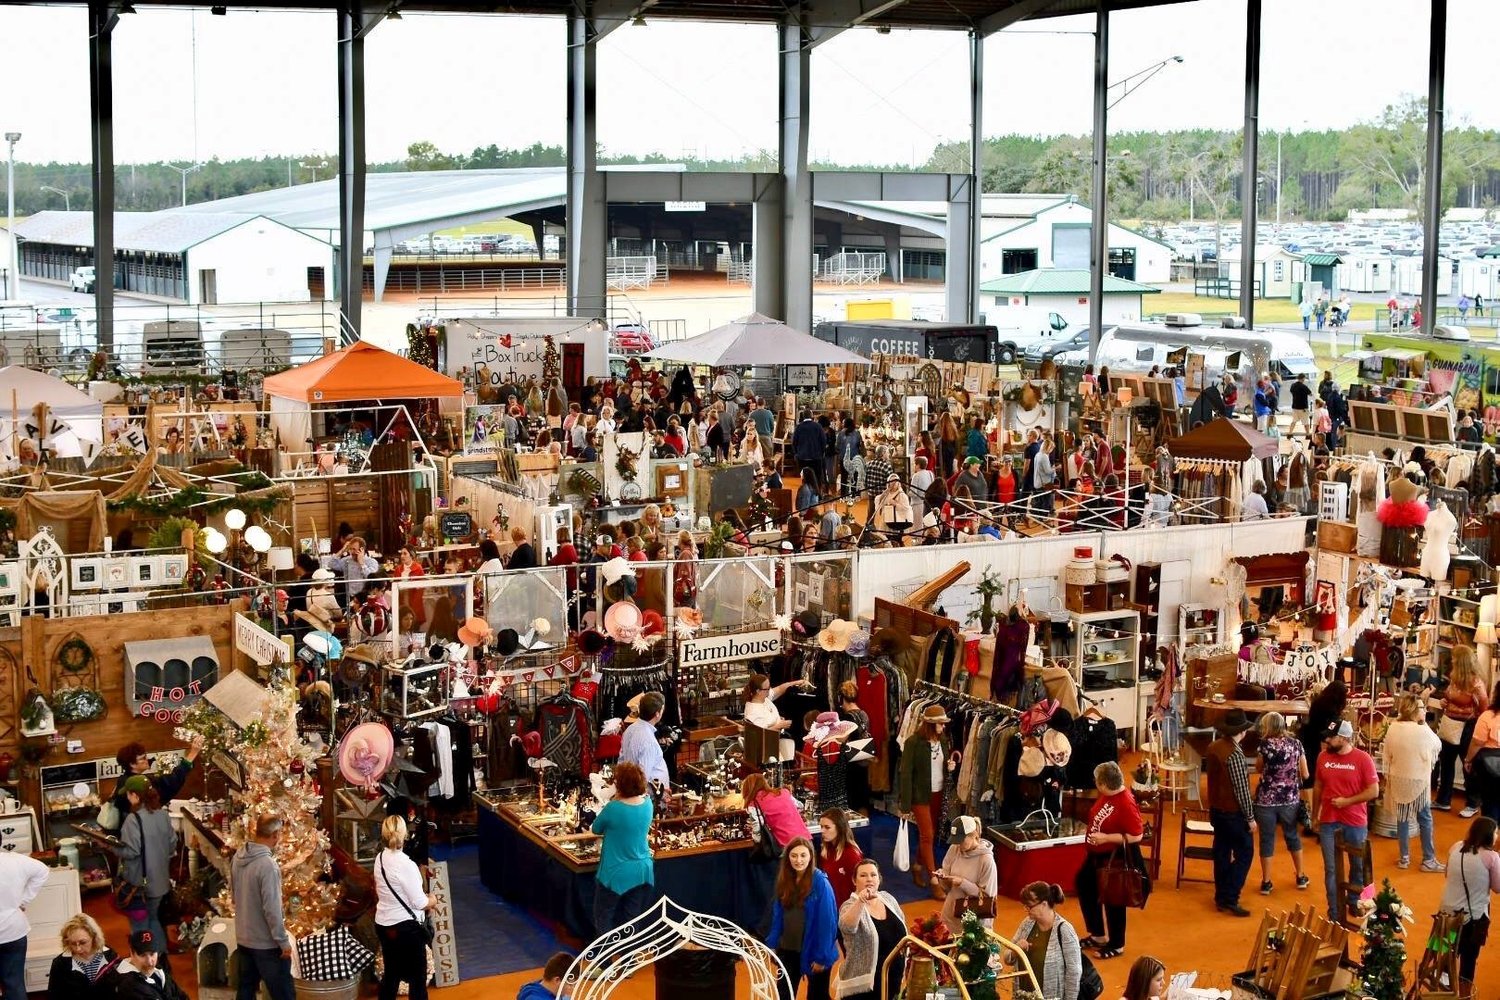 Vintage Market Days brings together a variety of vintage-inspired vendors in one place.